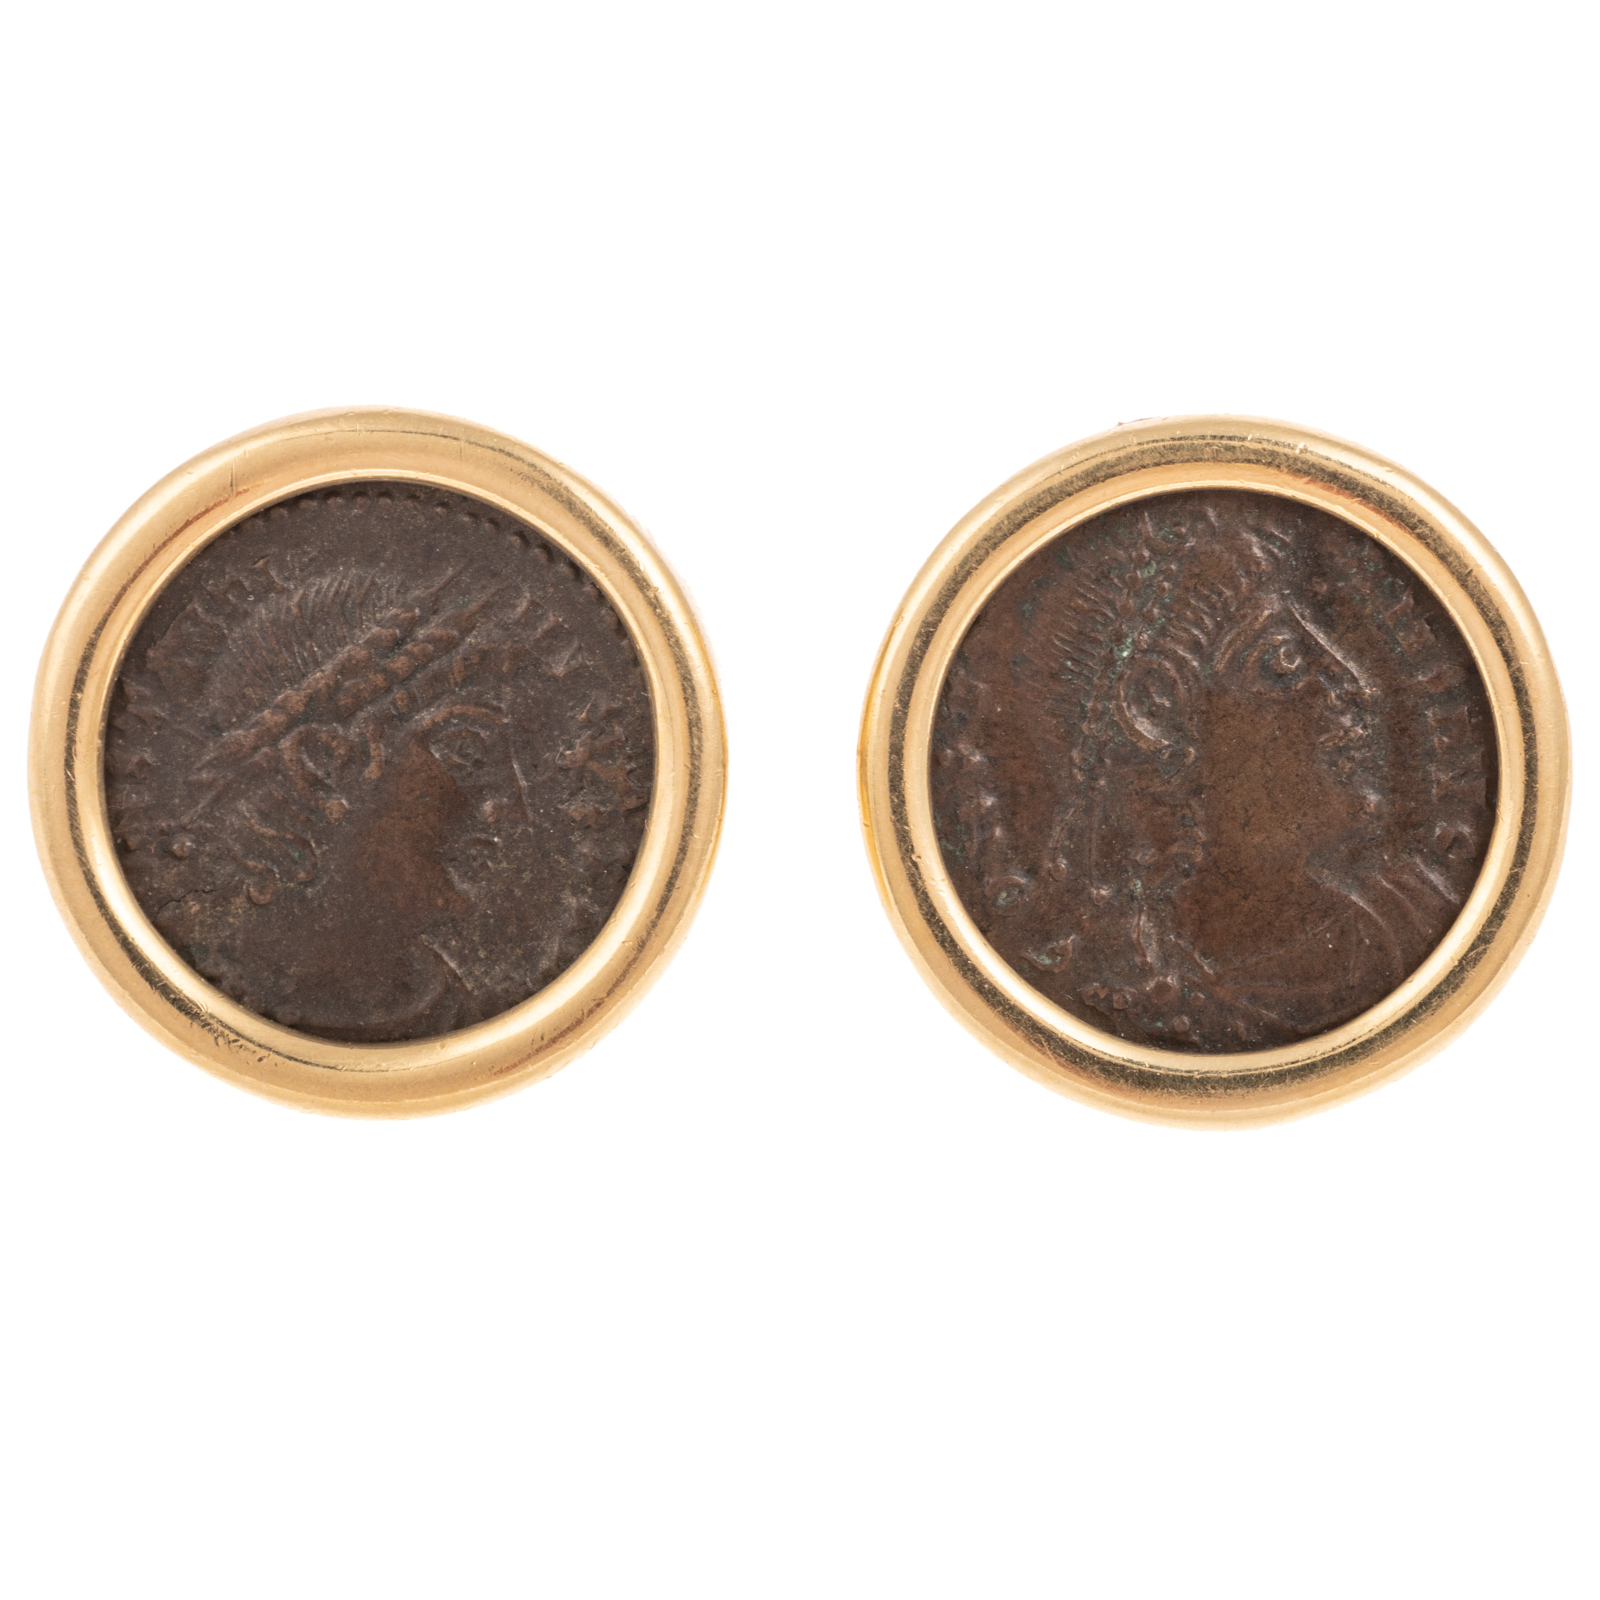 A PAIR OF ANCIENT ROMAN COIN EARRINGS